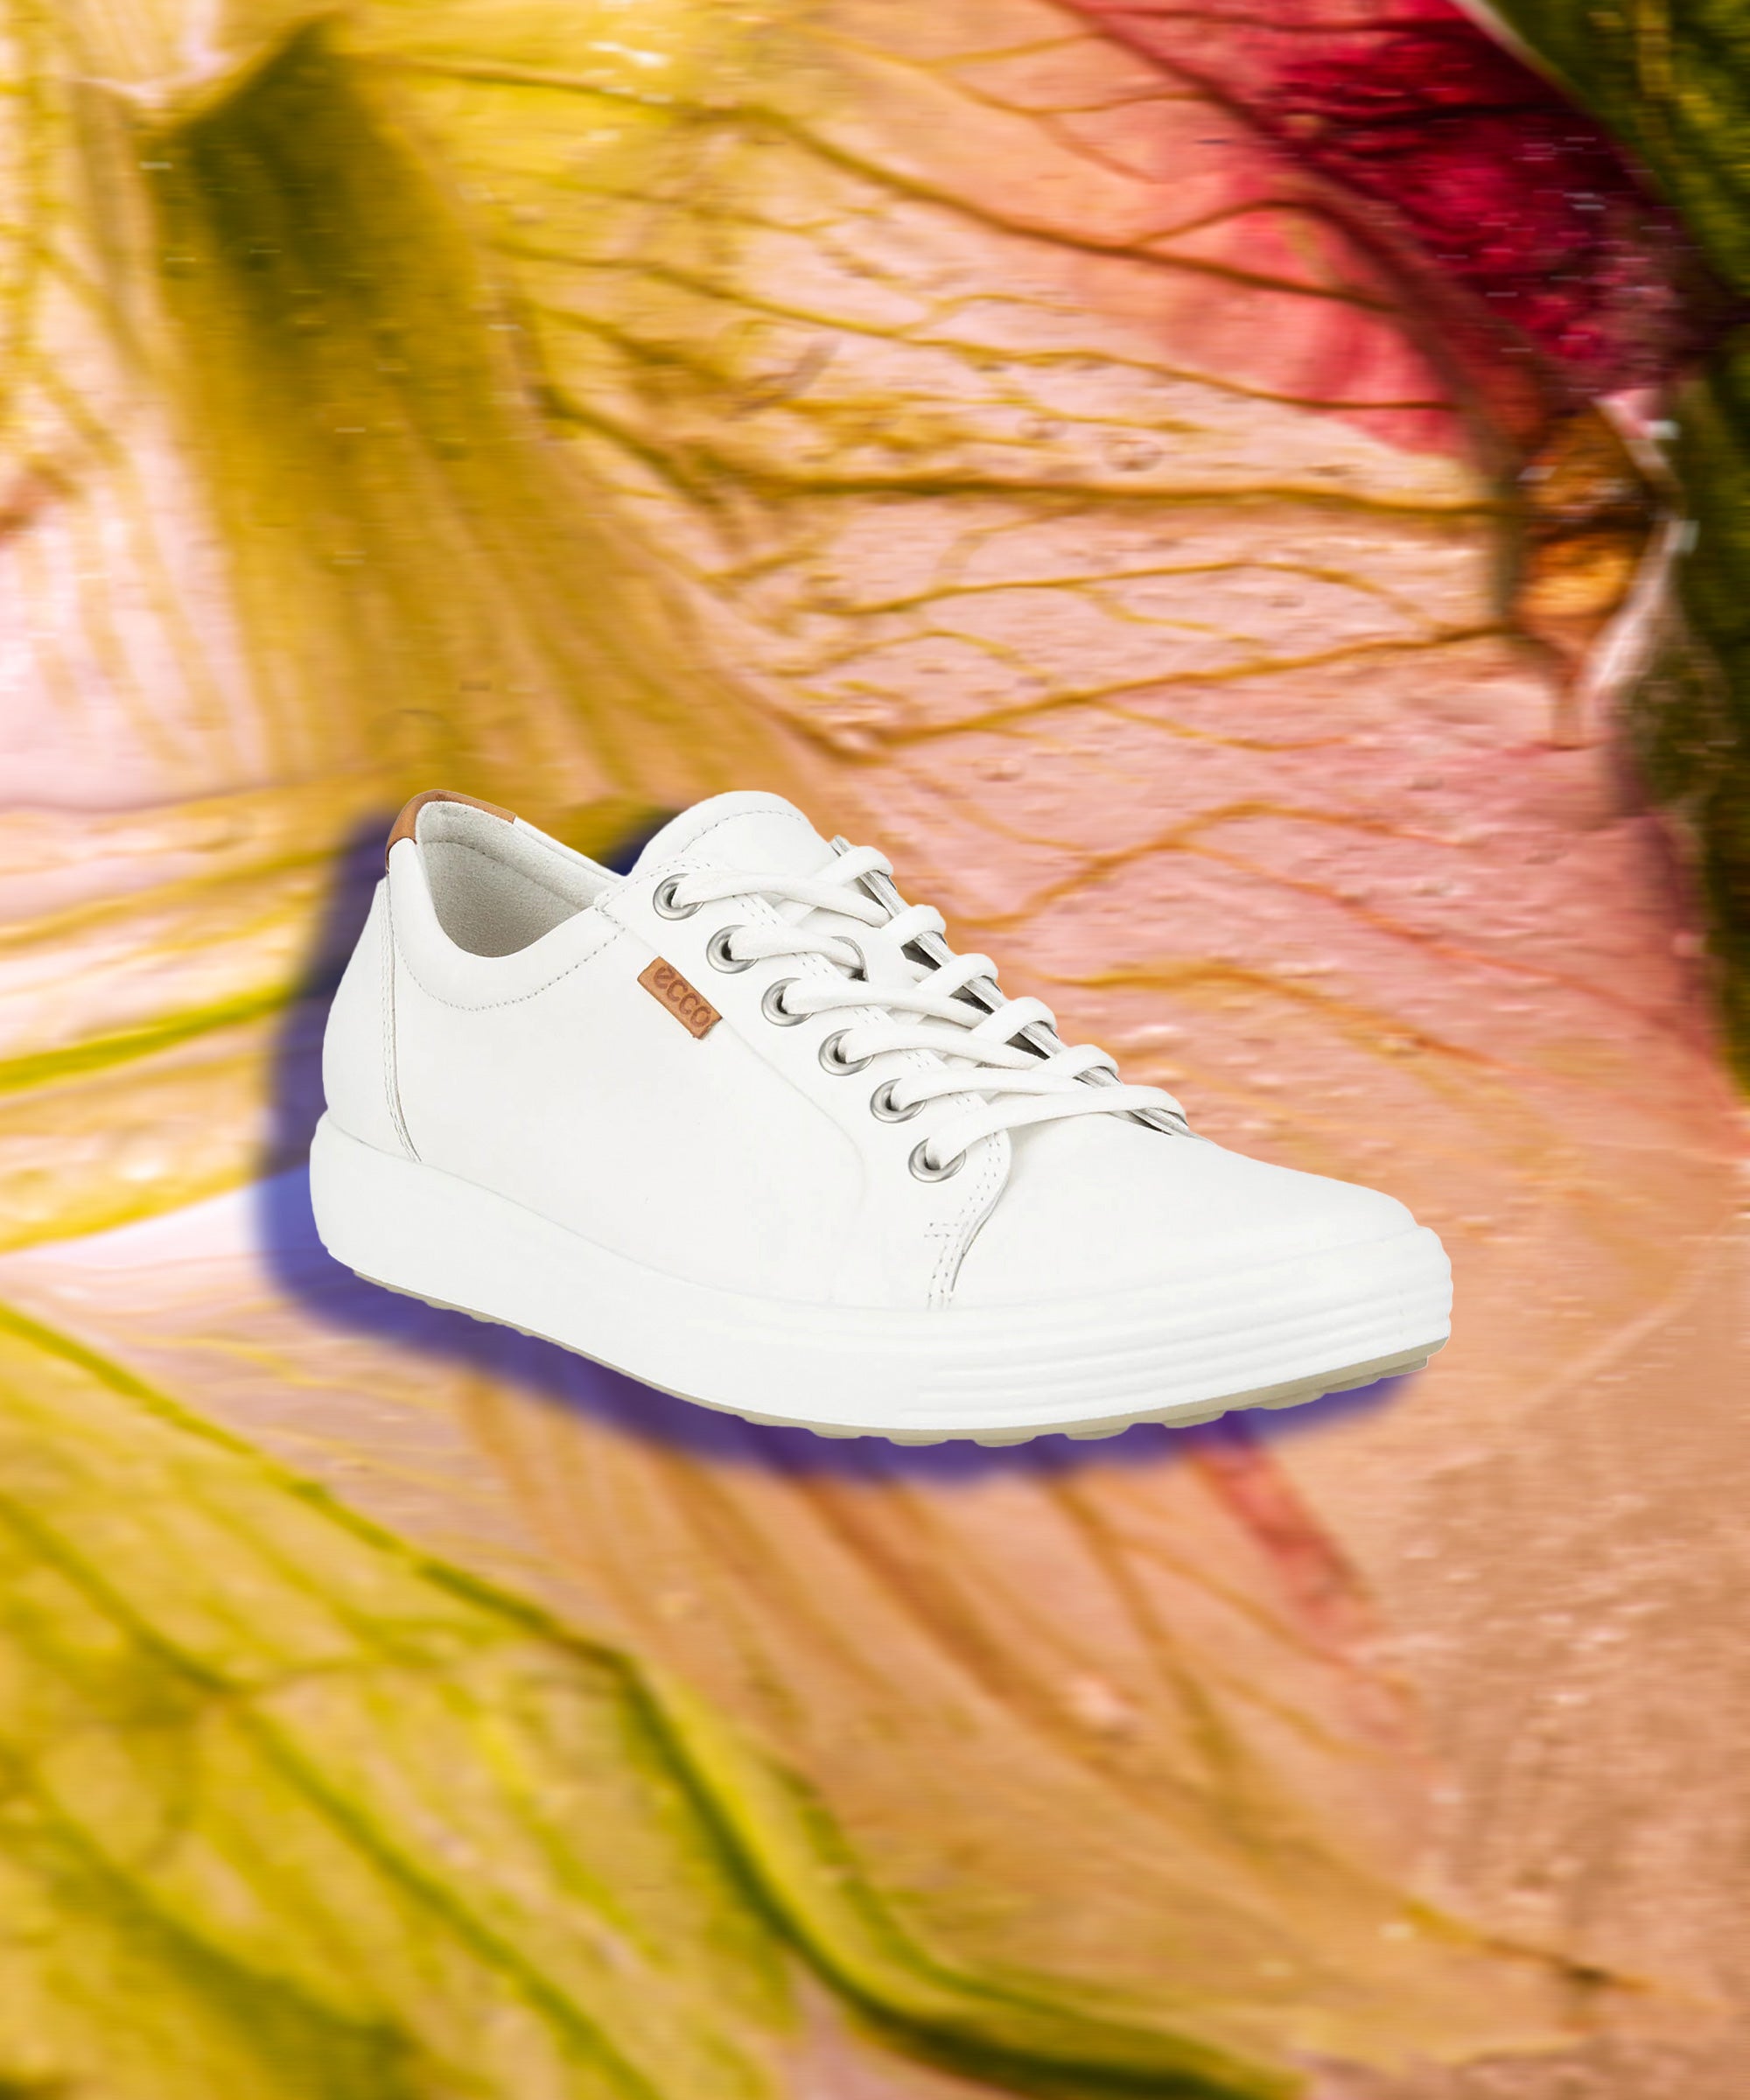 This Travel Writer Loves These Comfy Ecco Sneakers